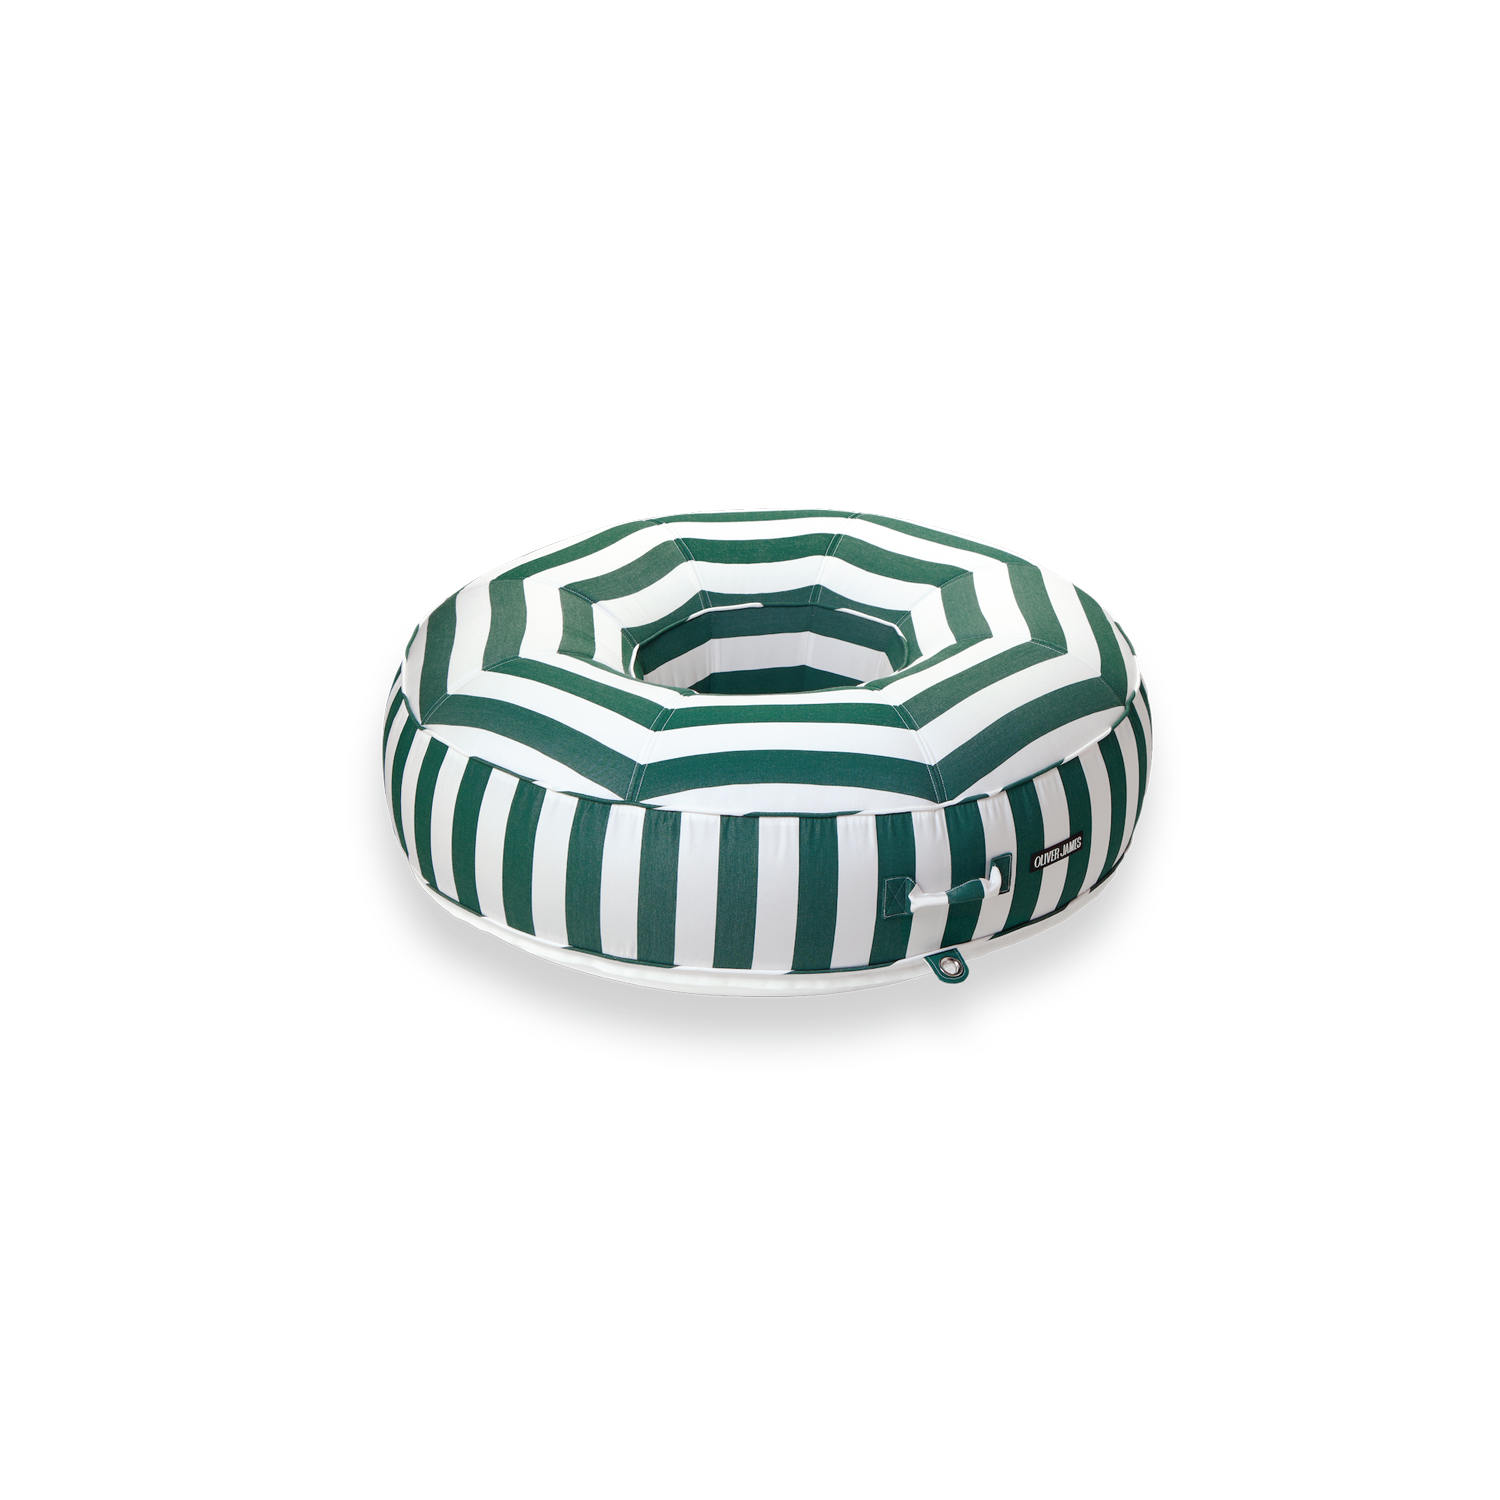 A angled front view of a green and white striped ring luxury pool floats.